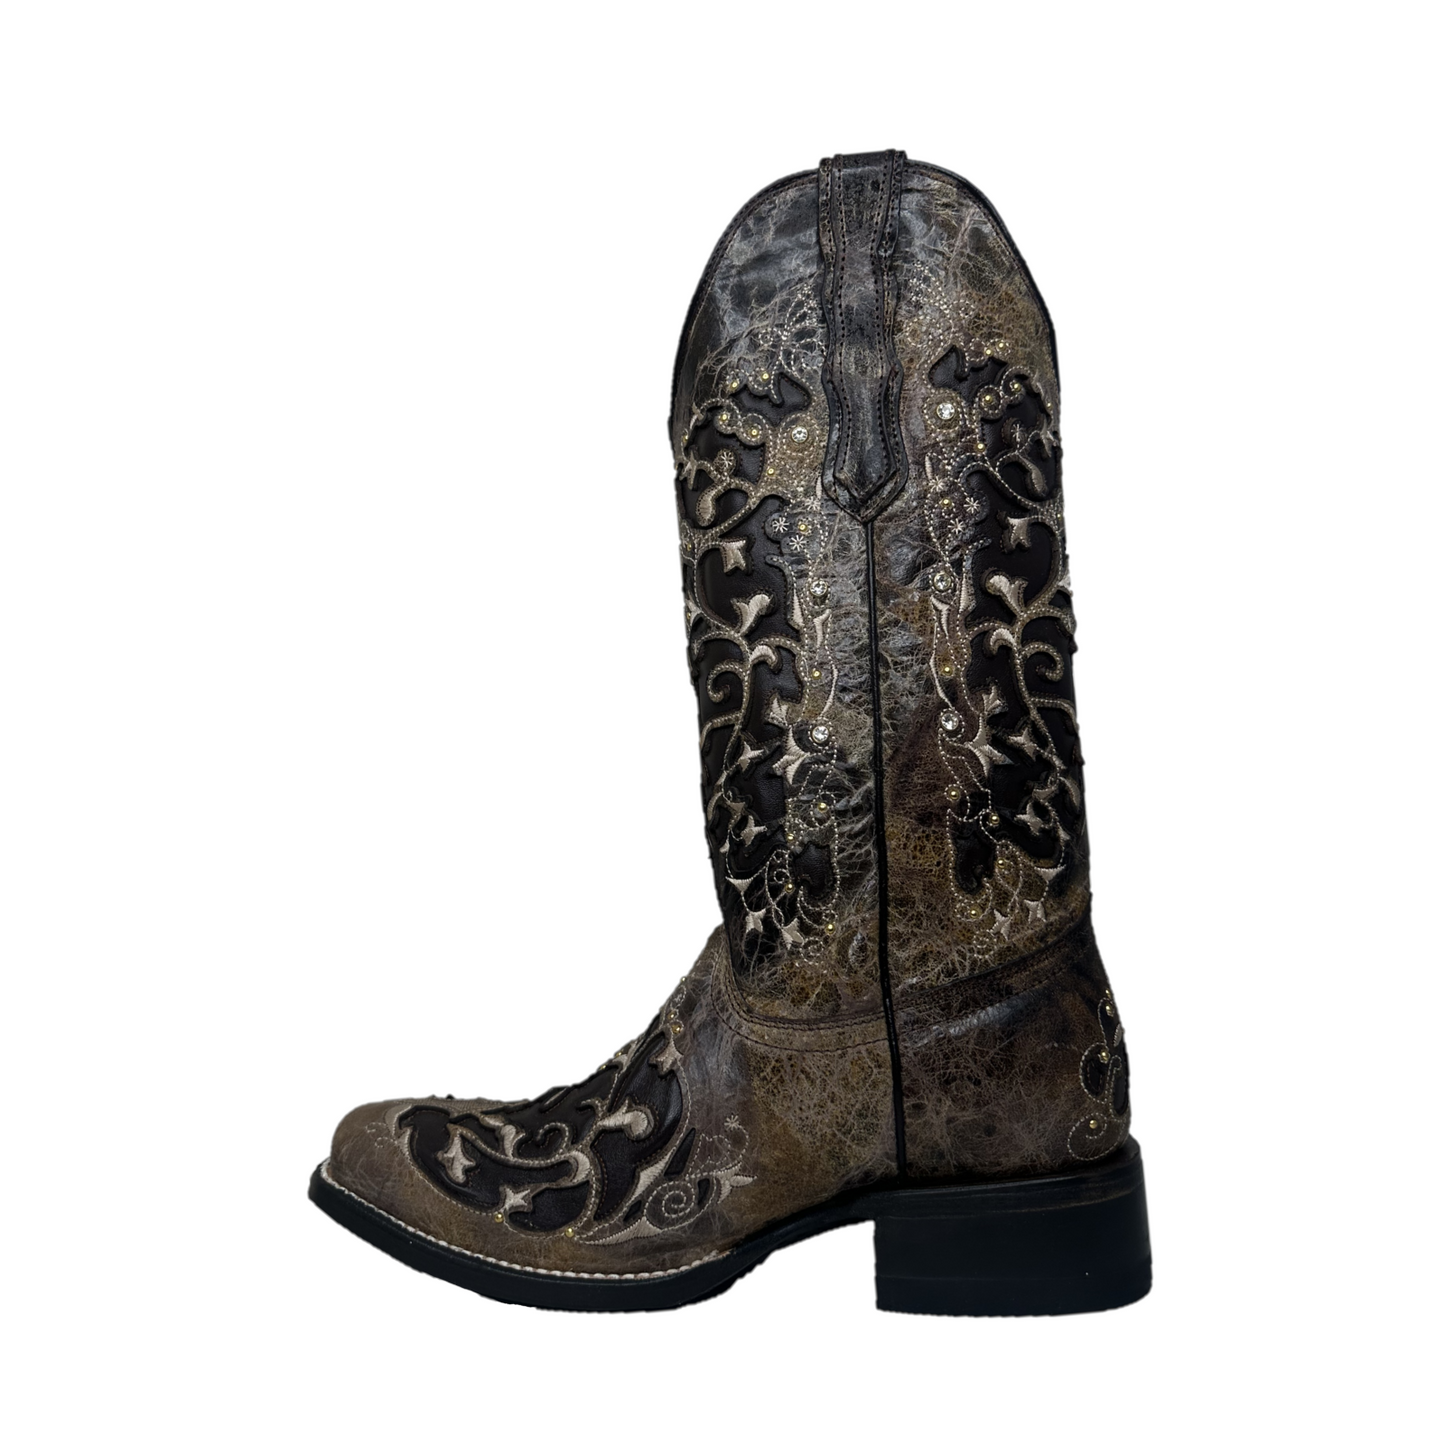 RockinLeather Ladies Volcano Crater Brown Western Boots 2815